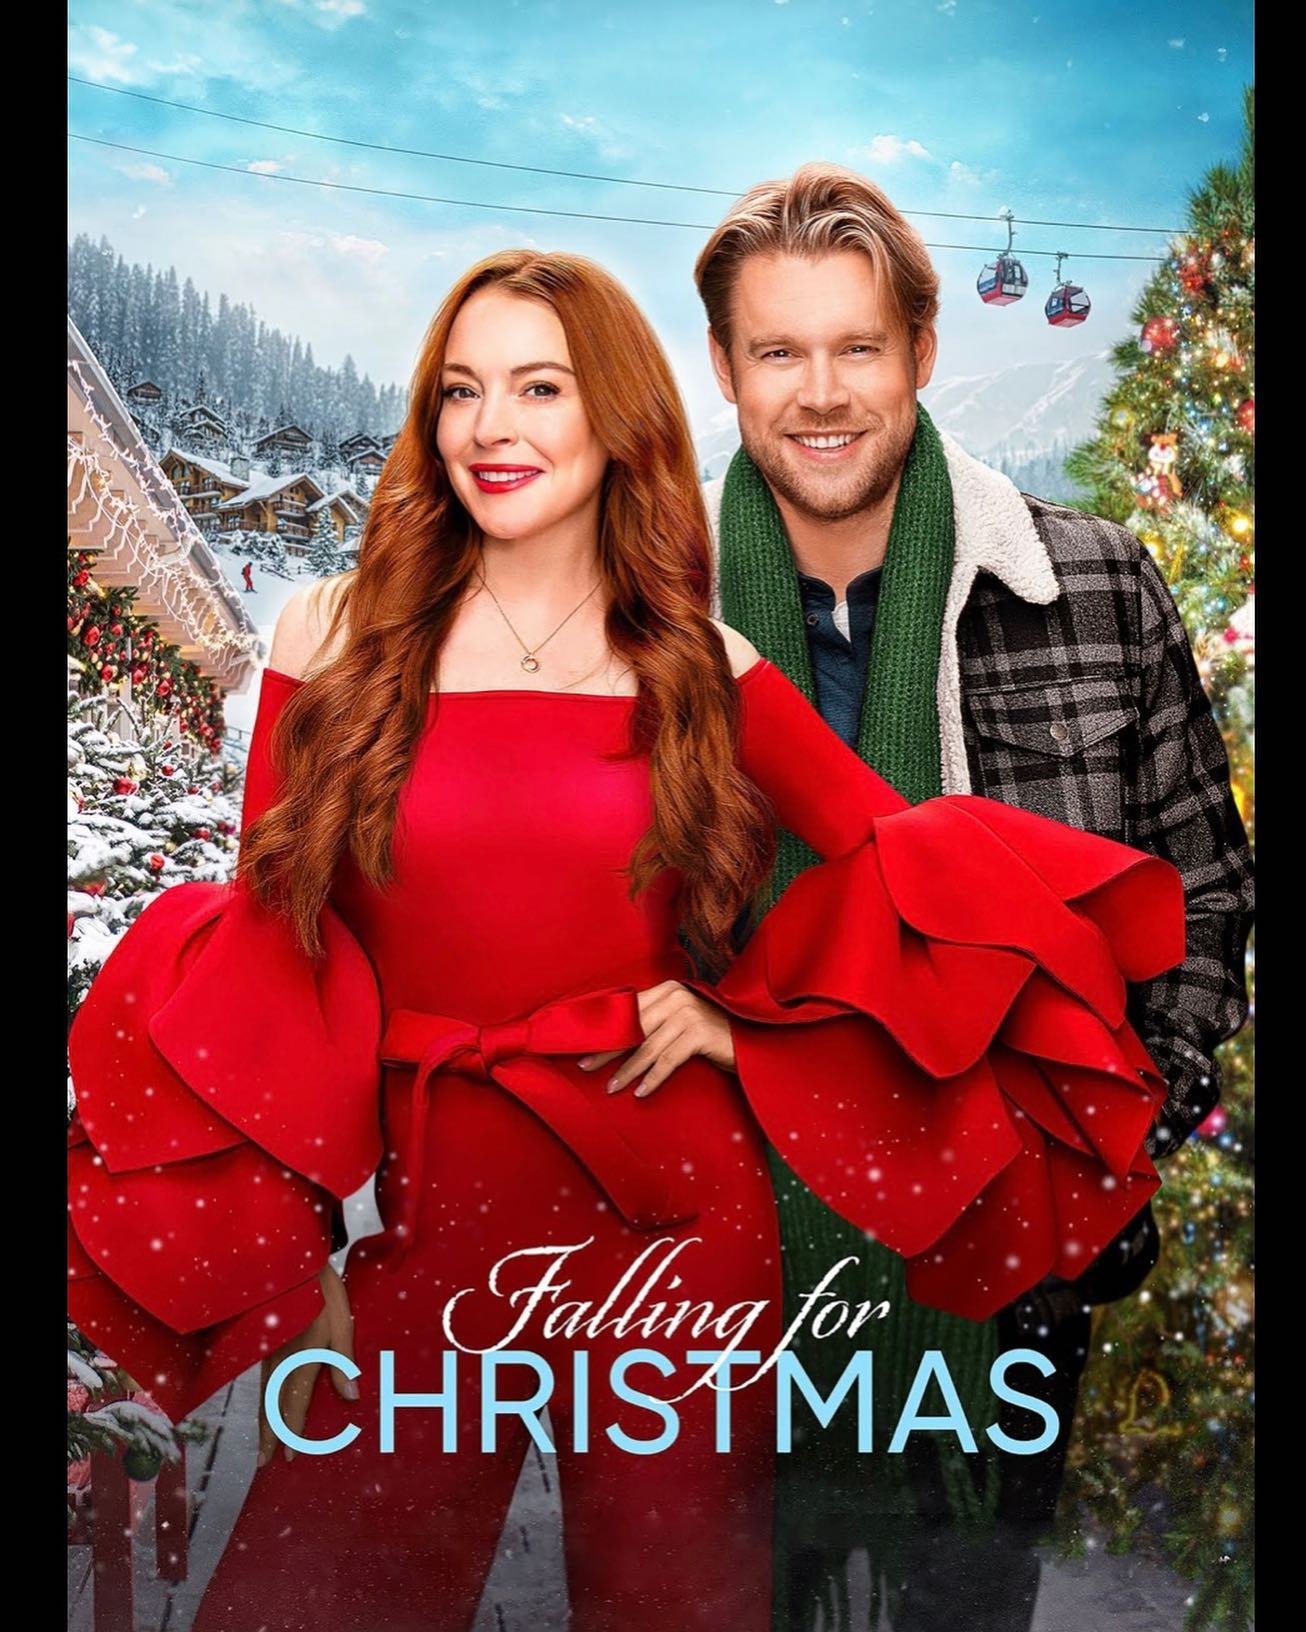 A must see! Thank you @lindsaylohan and @jackwagnerofficial for a perfect start to the season 🎄